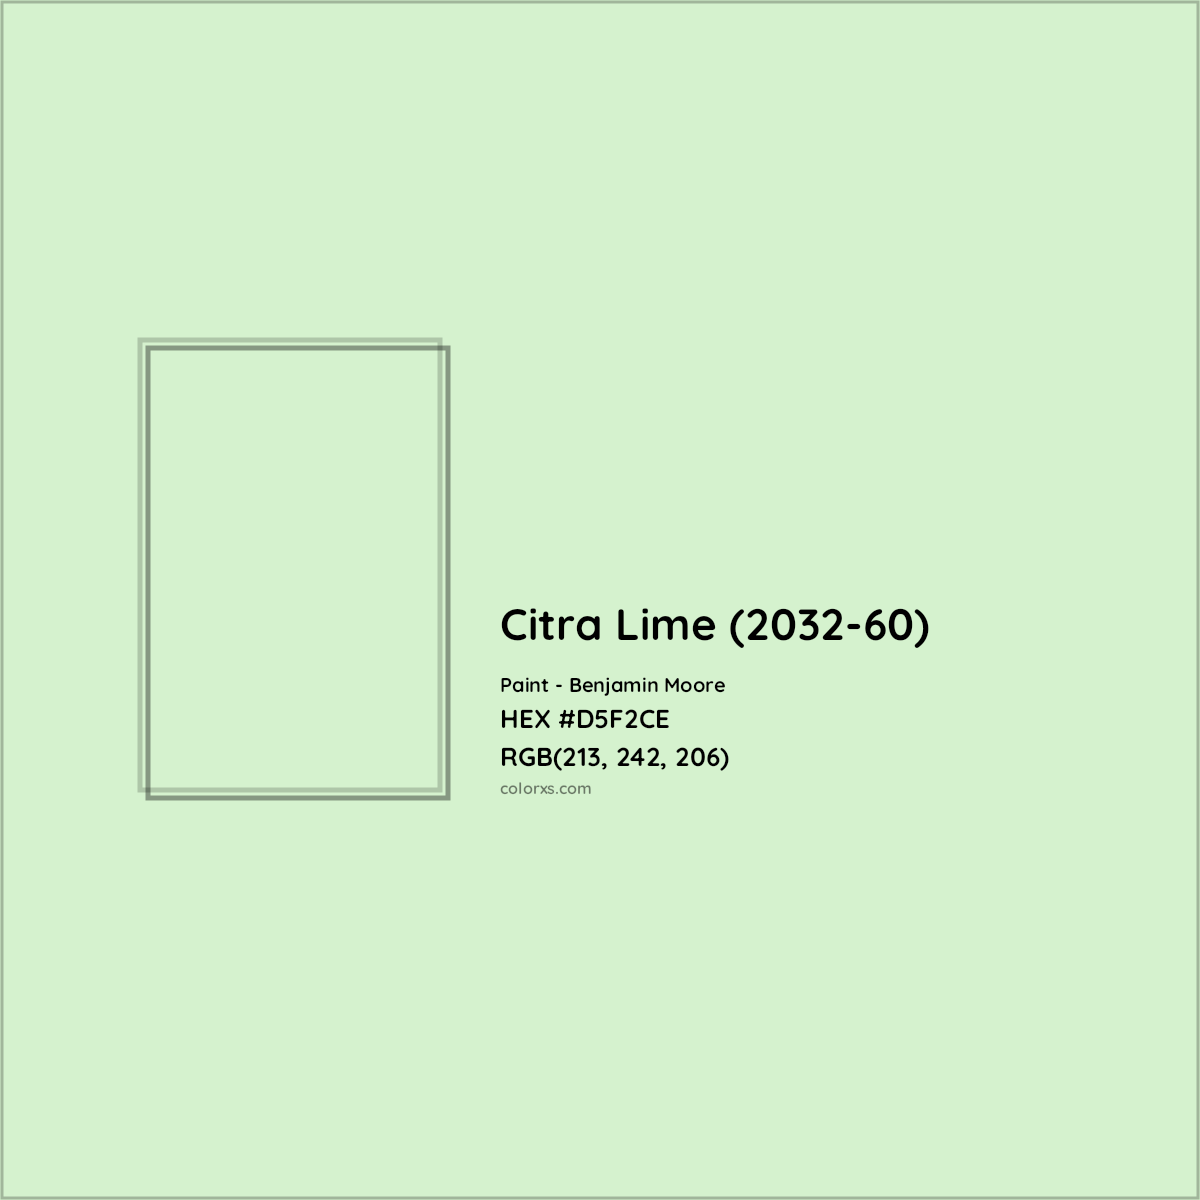 HEX #D5F2CE Citra Lime (2032-60) Paint Benjamin Moore - Color Code